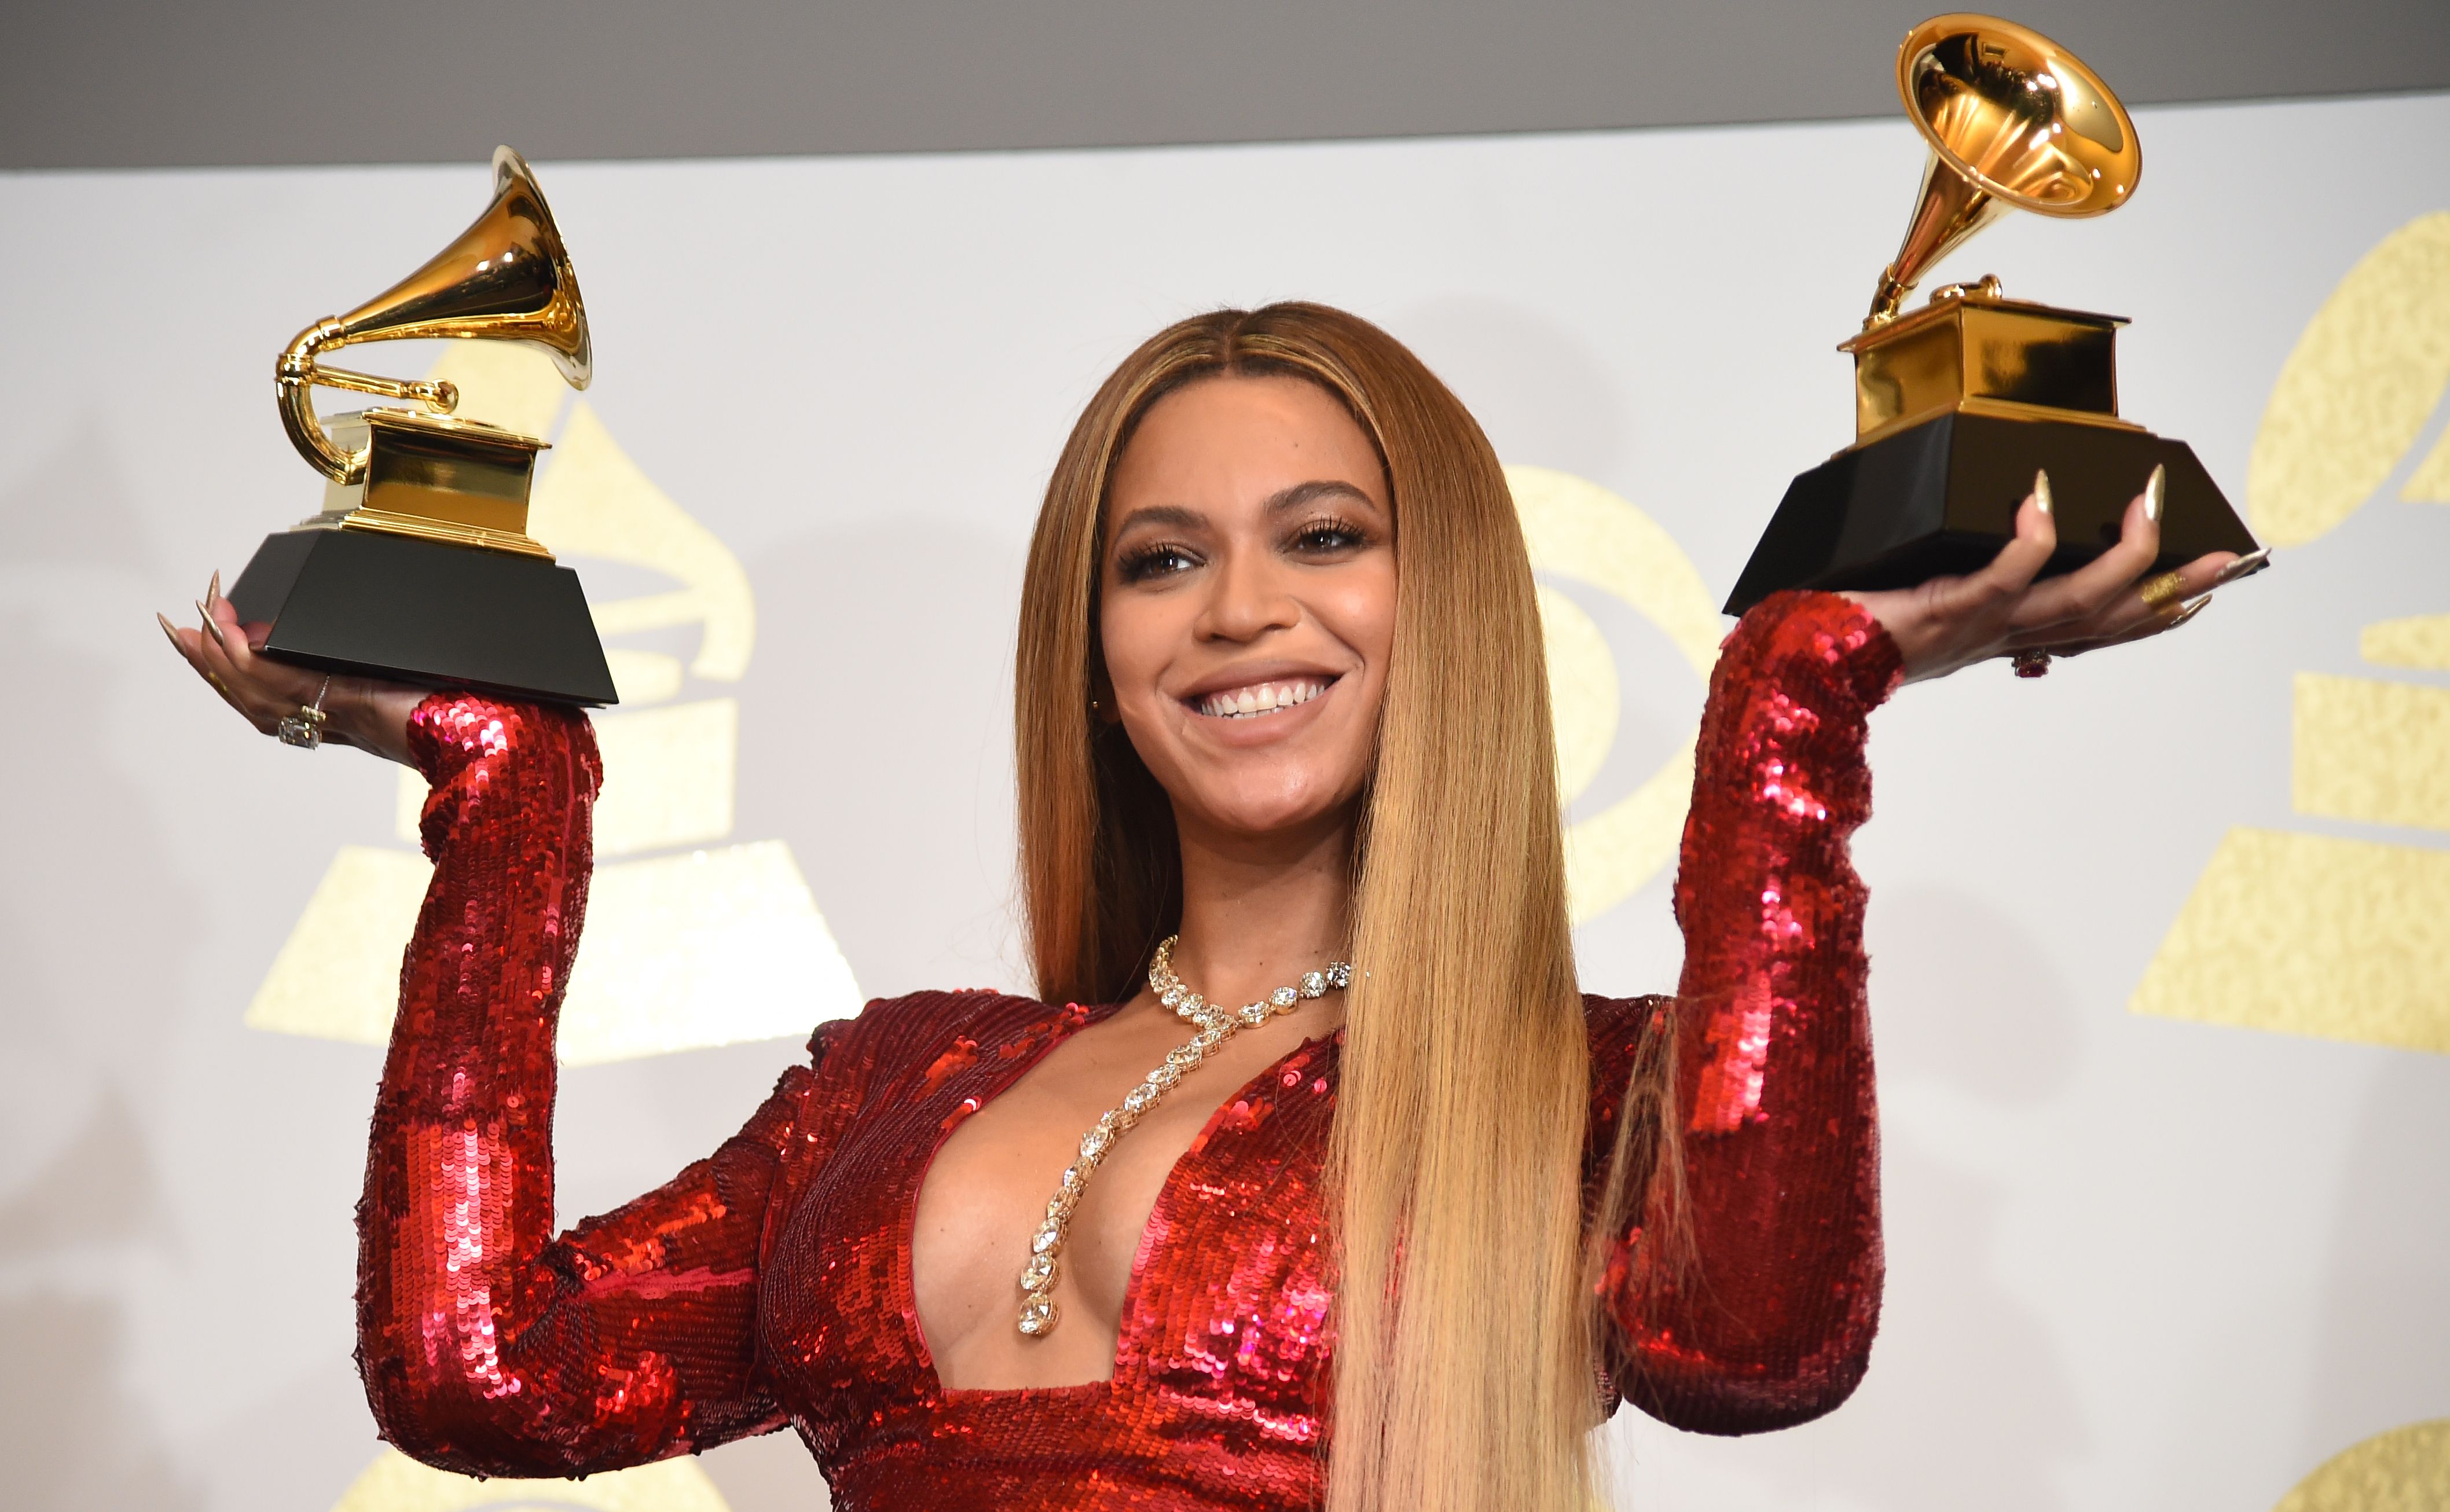 Singer Beyonce poses with her Grammy trophies in the press room during the 59th Annual Grammy music Awards on Feb. 12, 2017, in Los Angeles, Cali. (Robyn Beck—AFP/Getty Images)